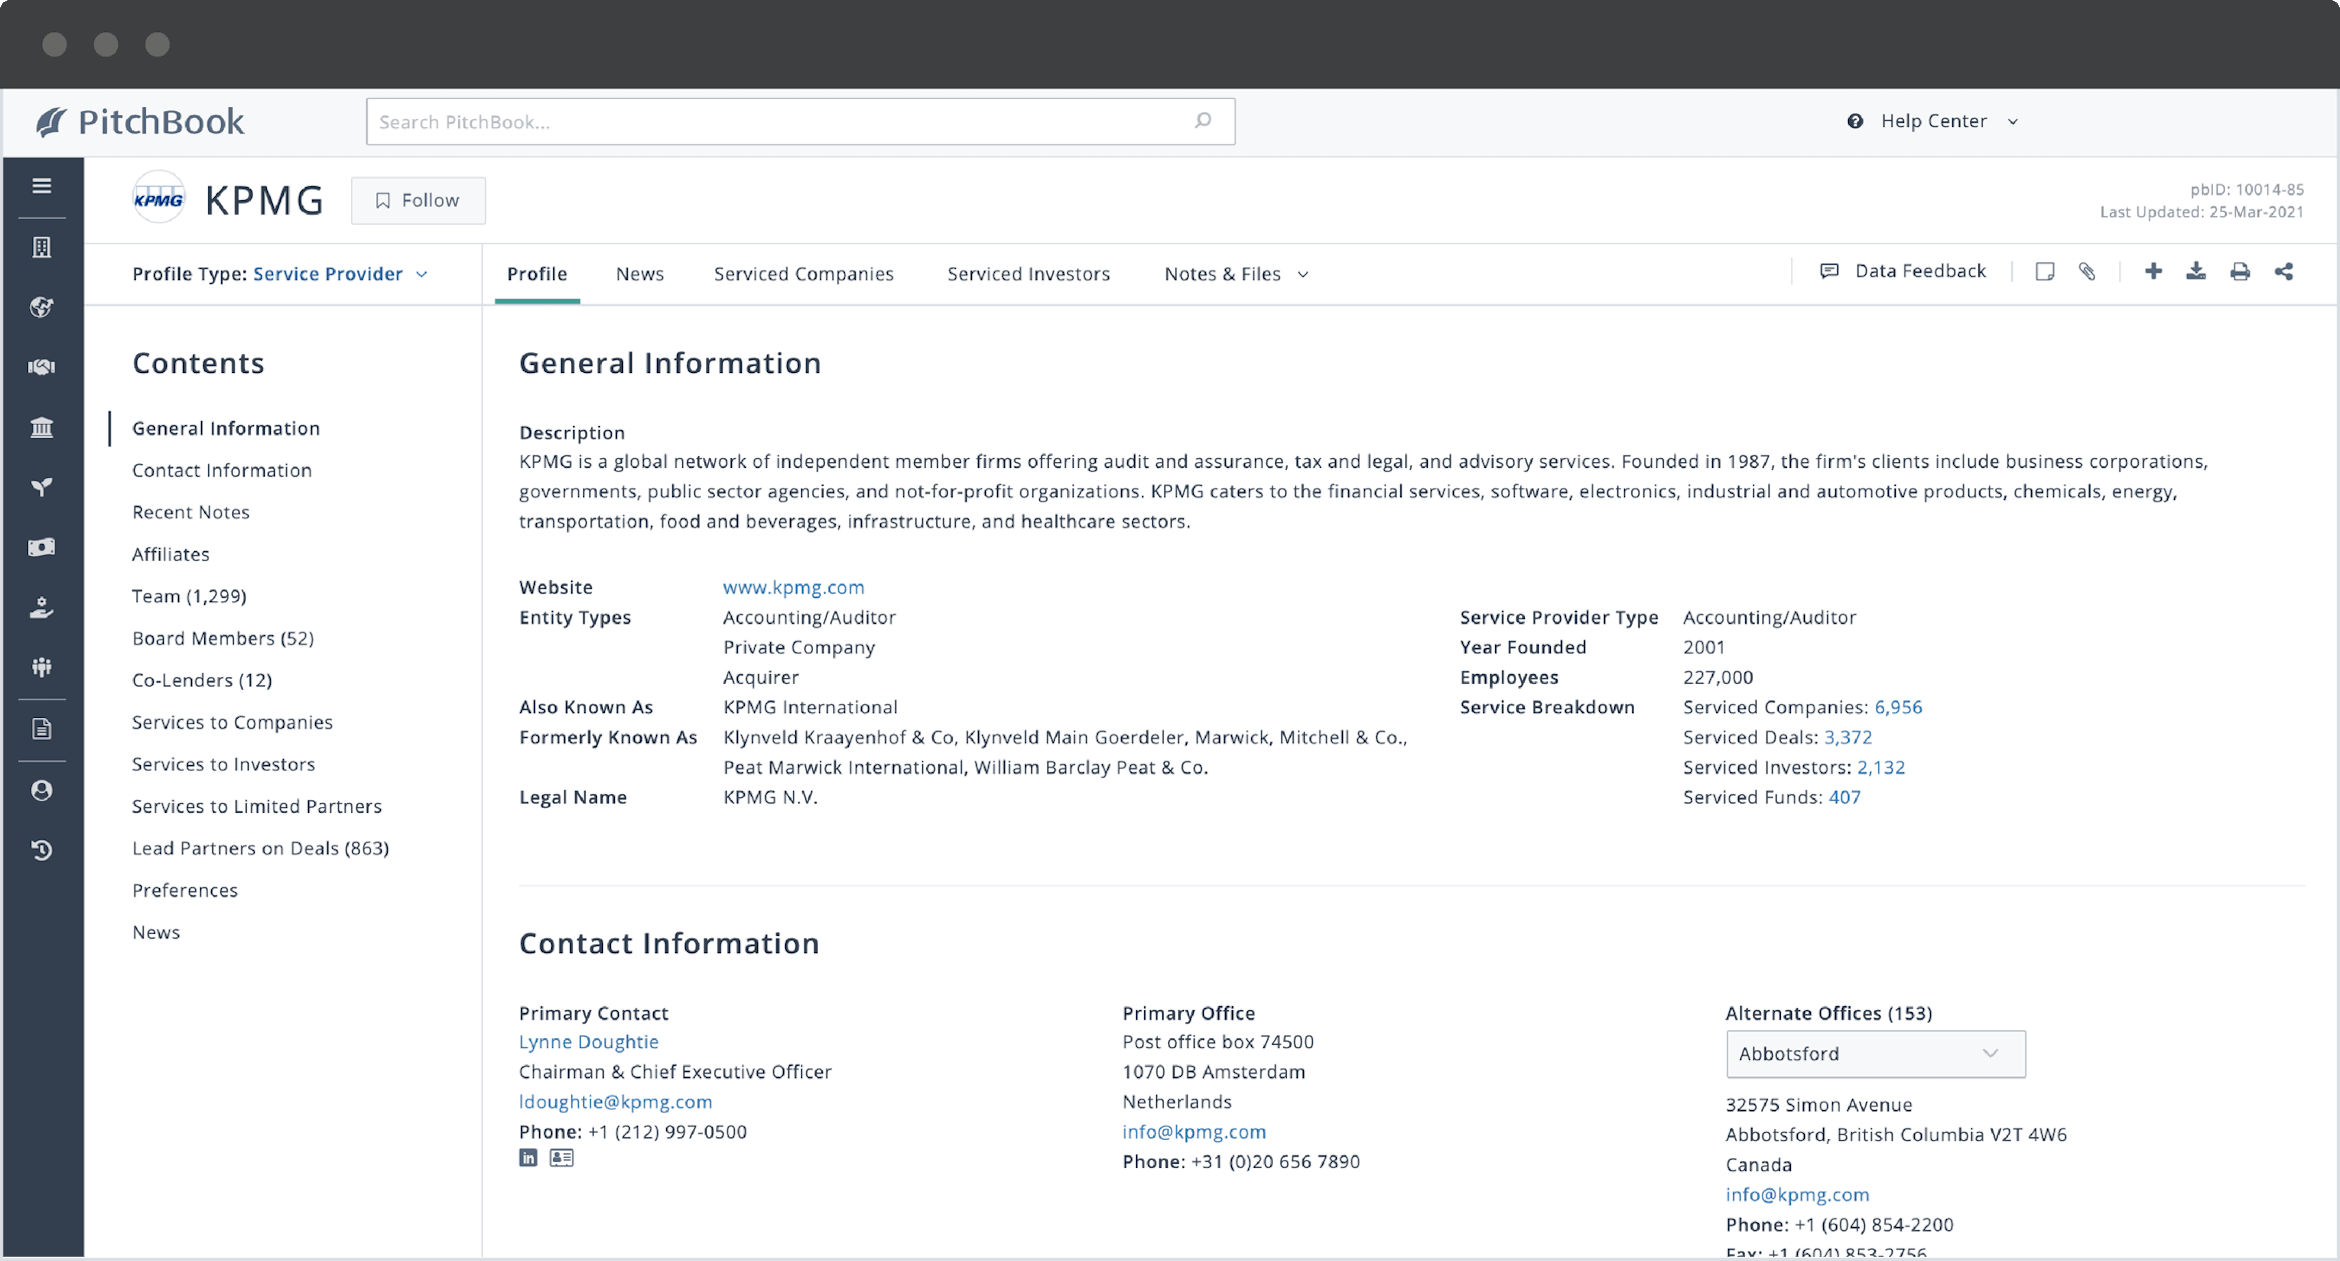 PitchBook advisor profile showing KPMG's firm information, including service breakdown and contact information. 